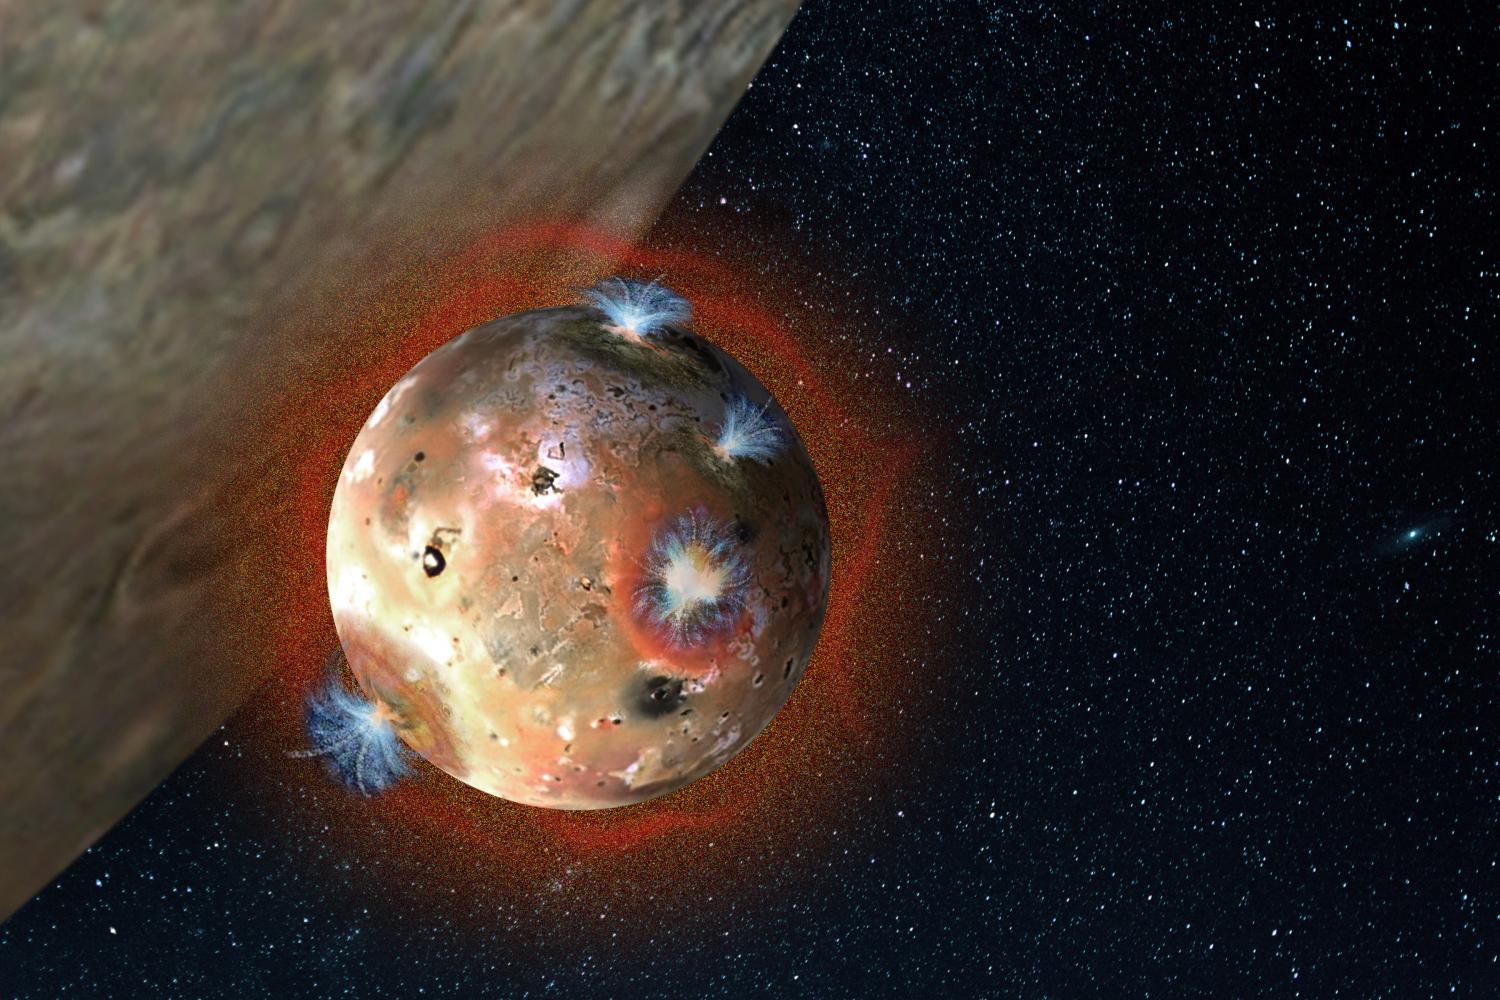 what is jupiters moon io like and why does io have so much volcanic activity on its surface